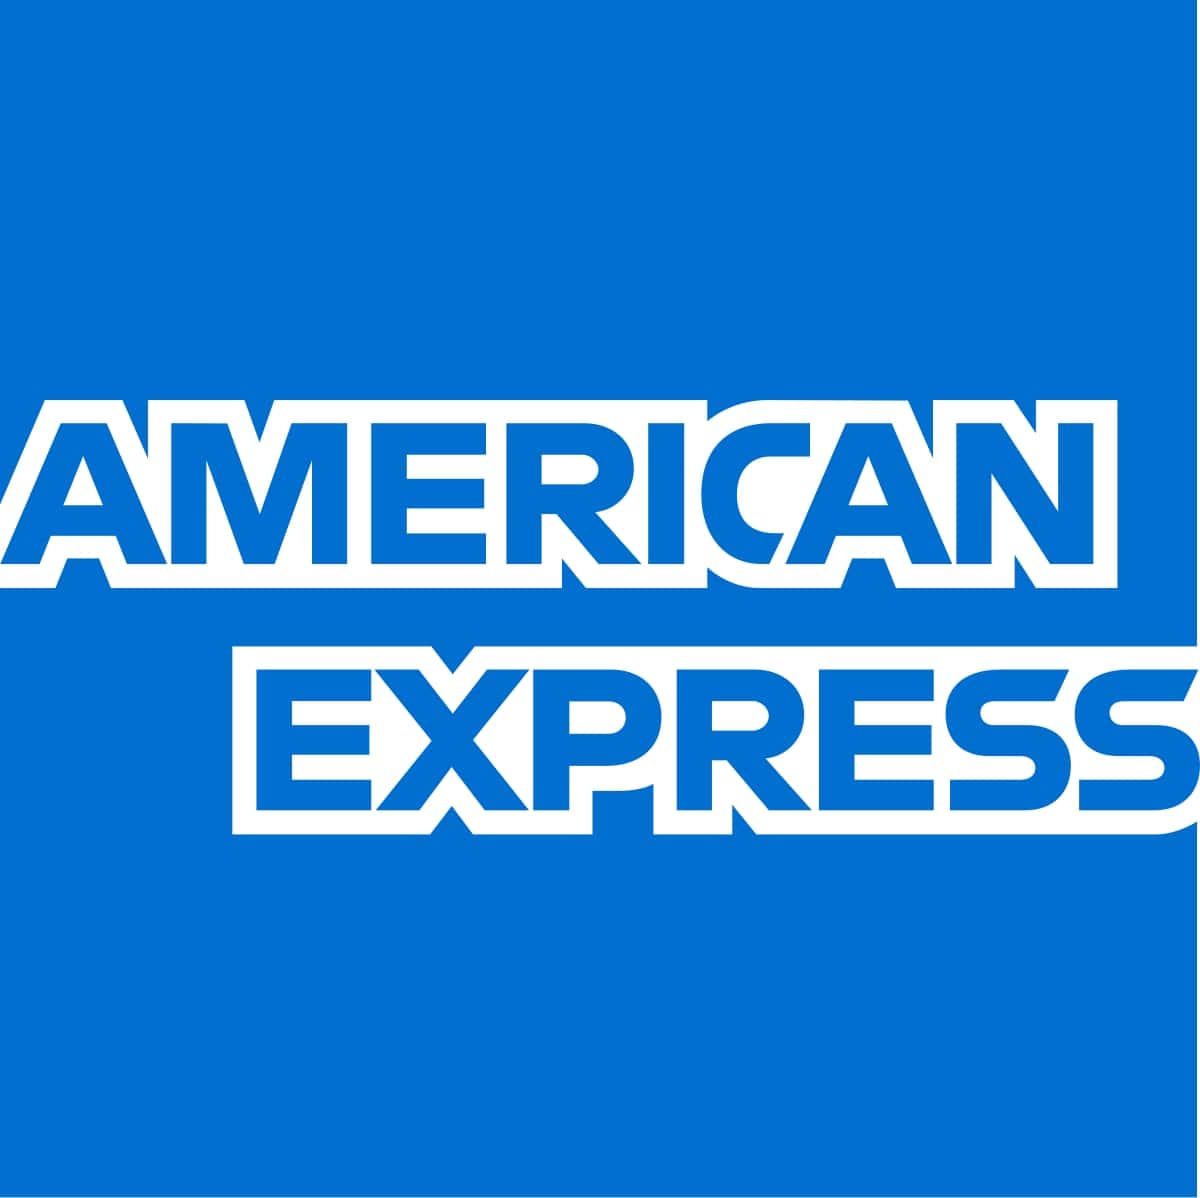 american express global business travel careers